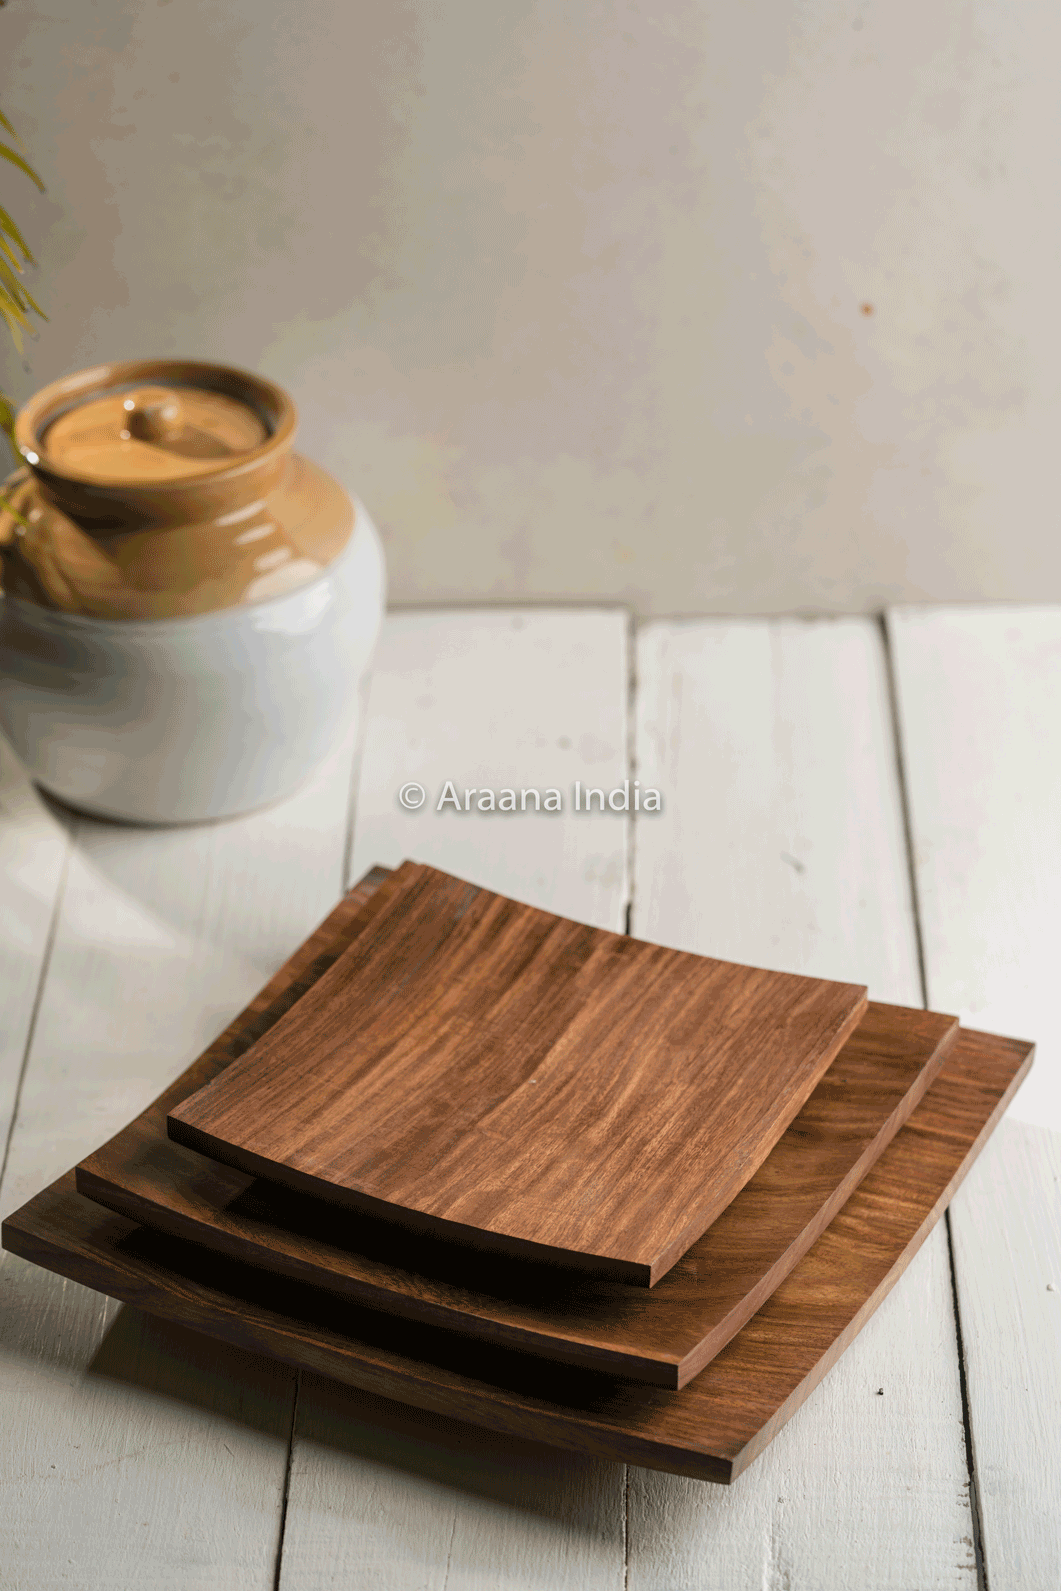 Mandhas - Set of 3 wooden platters, a product by Araana Homes